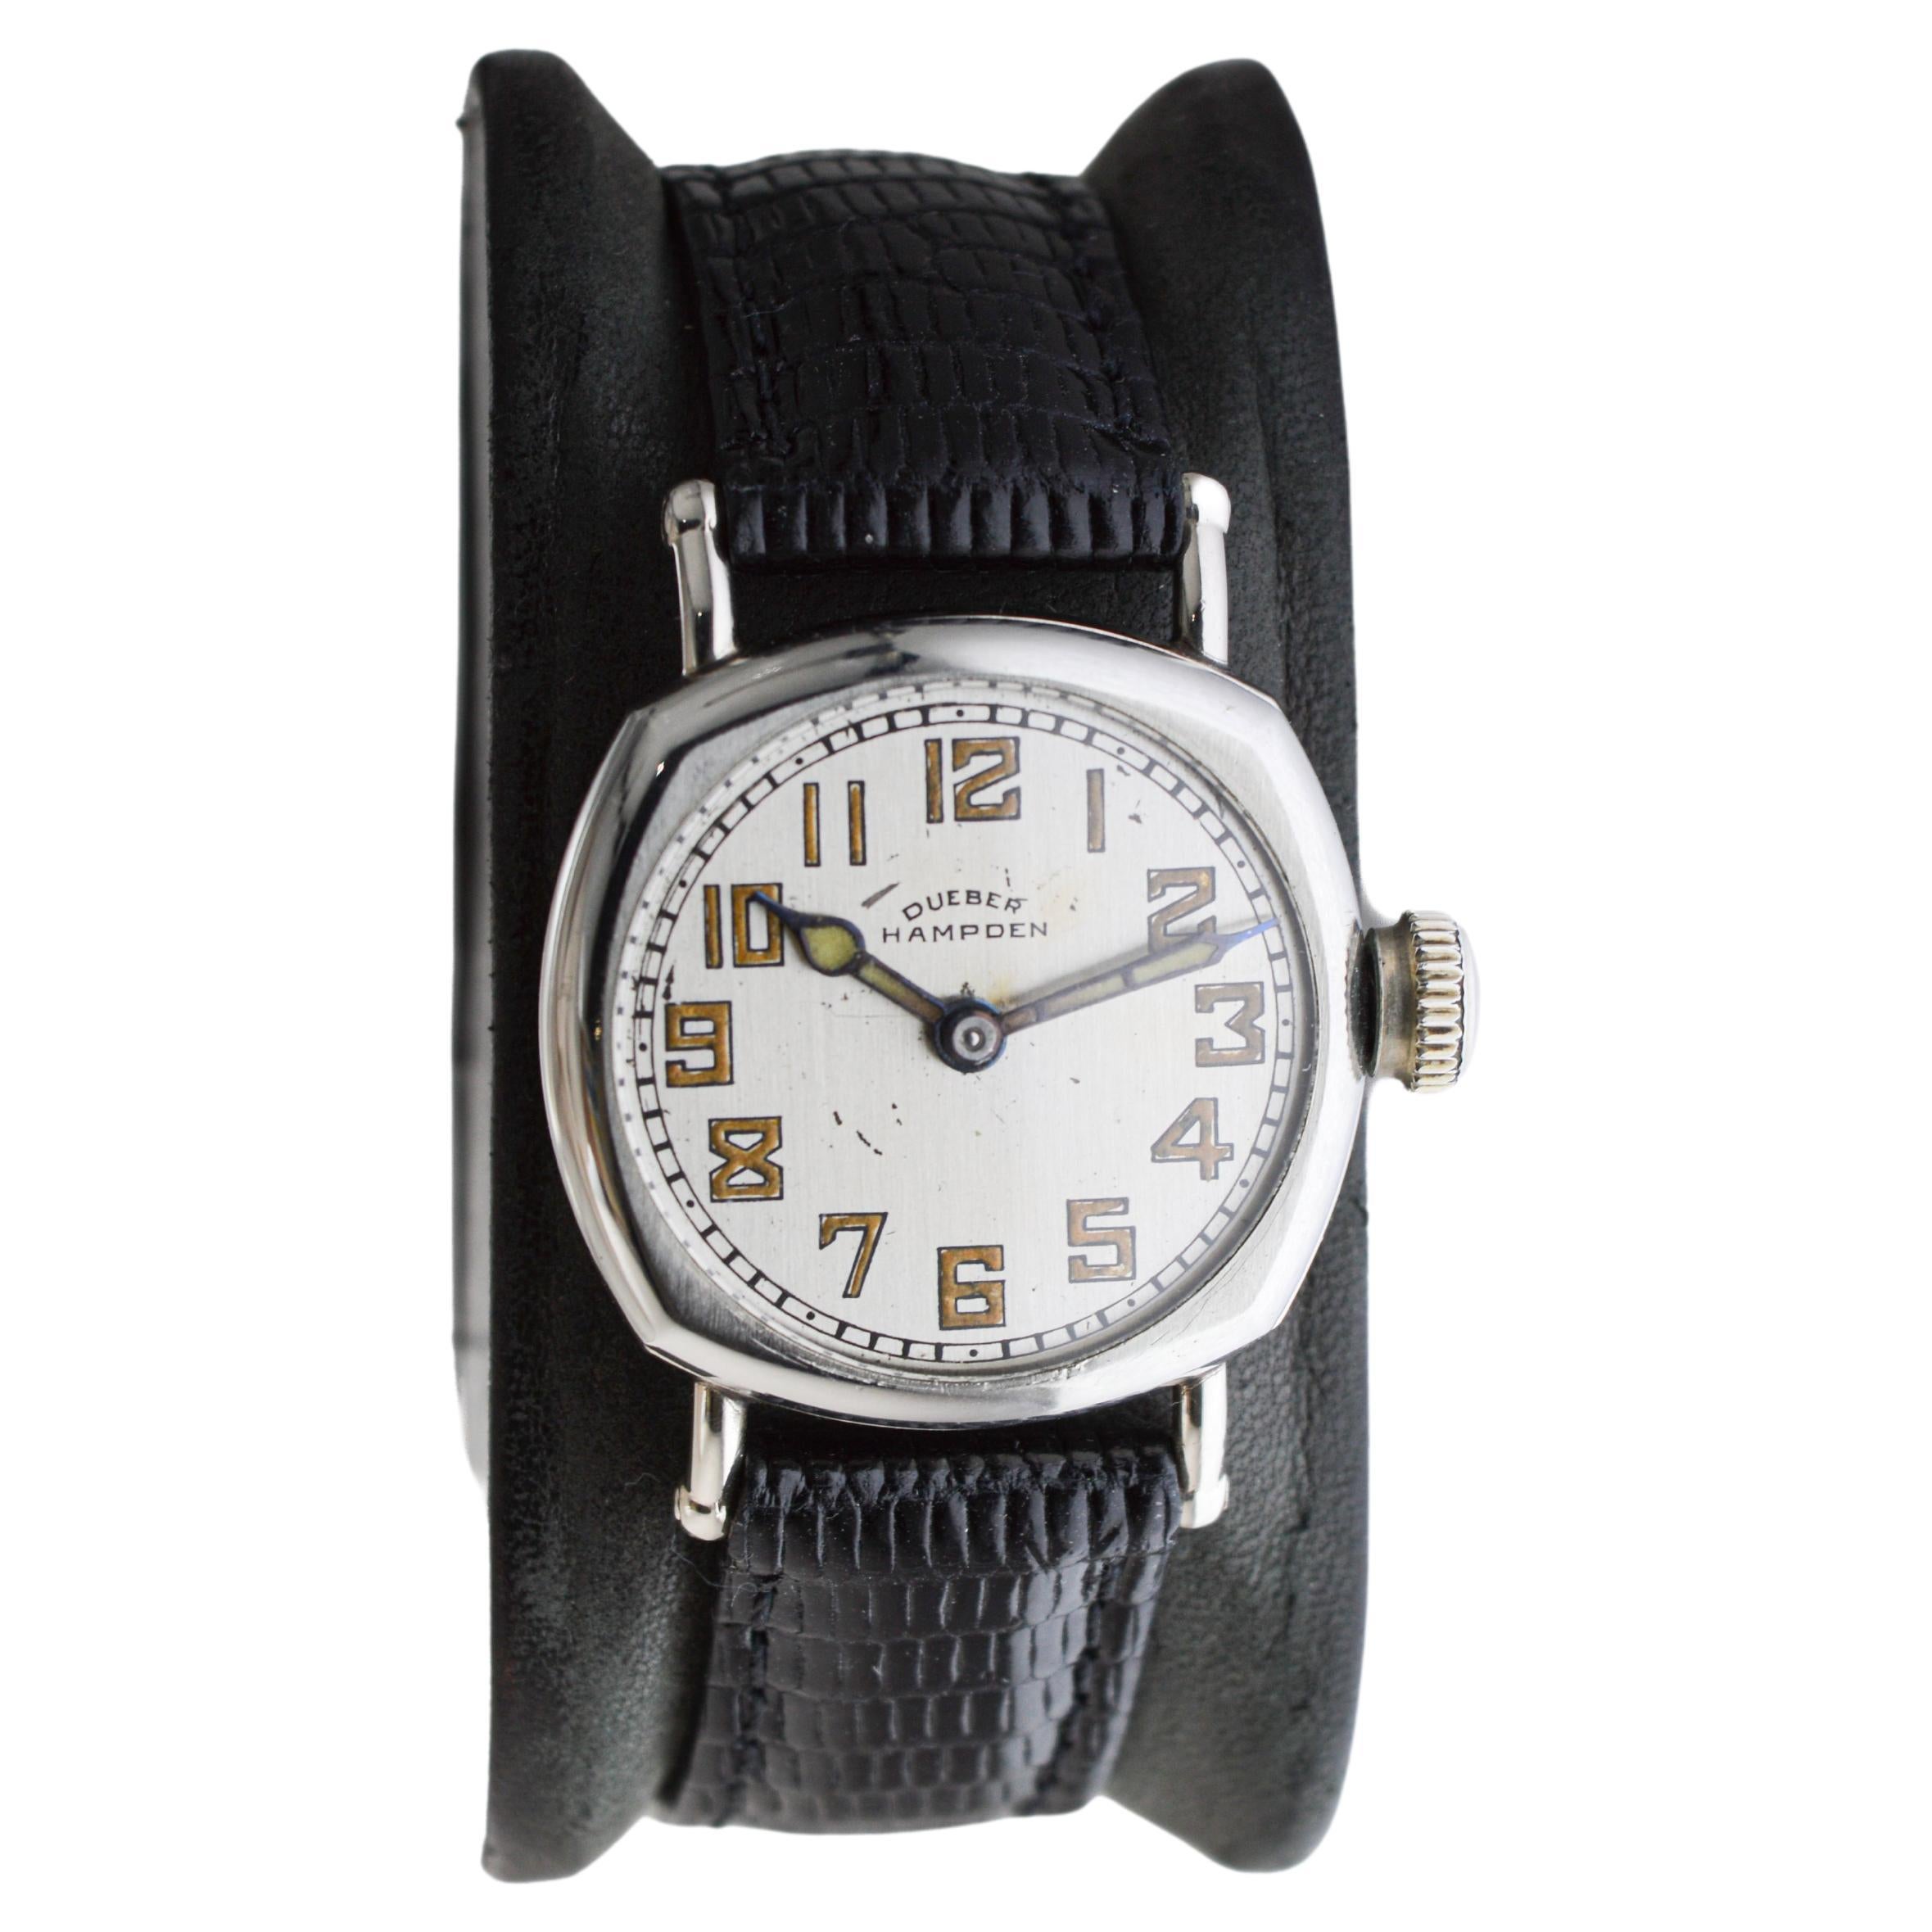 FACTORY / HOUSE: Dueber Hampden Watch Company
STYLE / REFERENCE: Cushion Shaped / Military Style 
METAL / MATERIAL: Nickel Silver
CIRCA / YEAR: 1920's
DIMENSIONS / SIZE: Length 28mm X Diameter 35mm
MOVEMENT / CALIBER: Manual Winding / 15 Jewels /